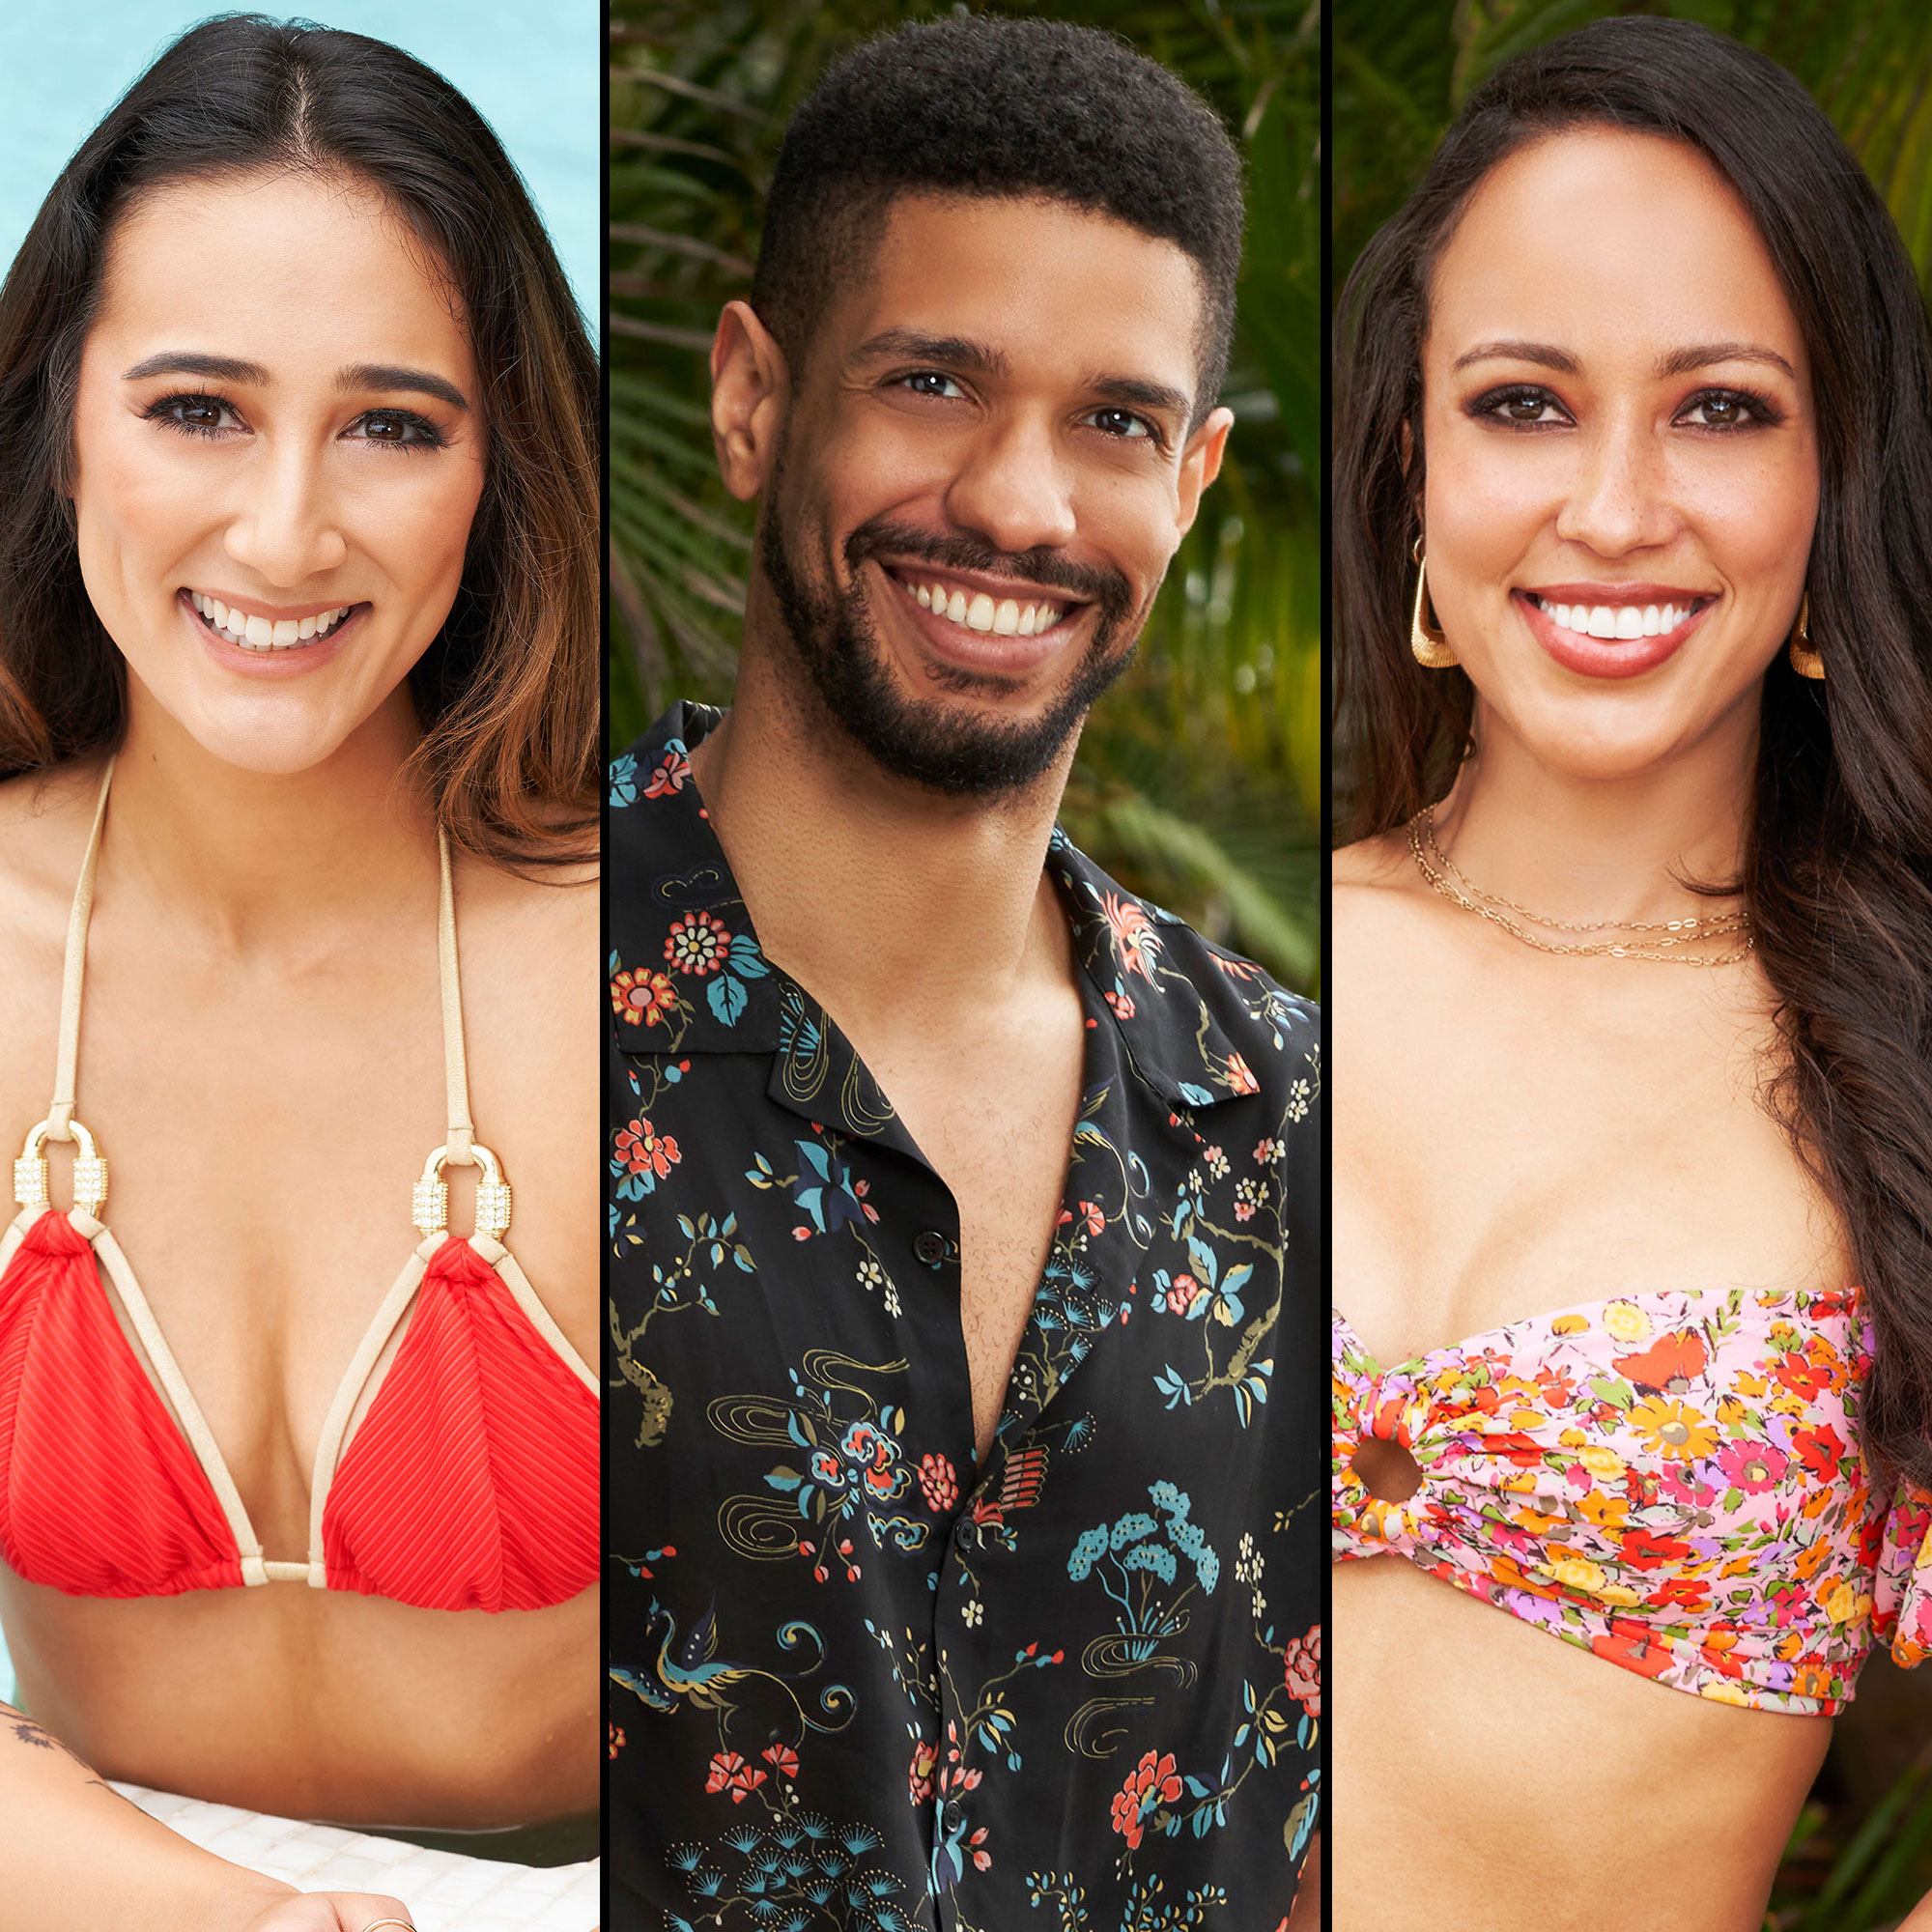 Jill Recalls Meeting Romeo With Kira Before Bachelor in Paradise photo pic